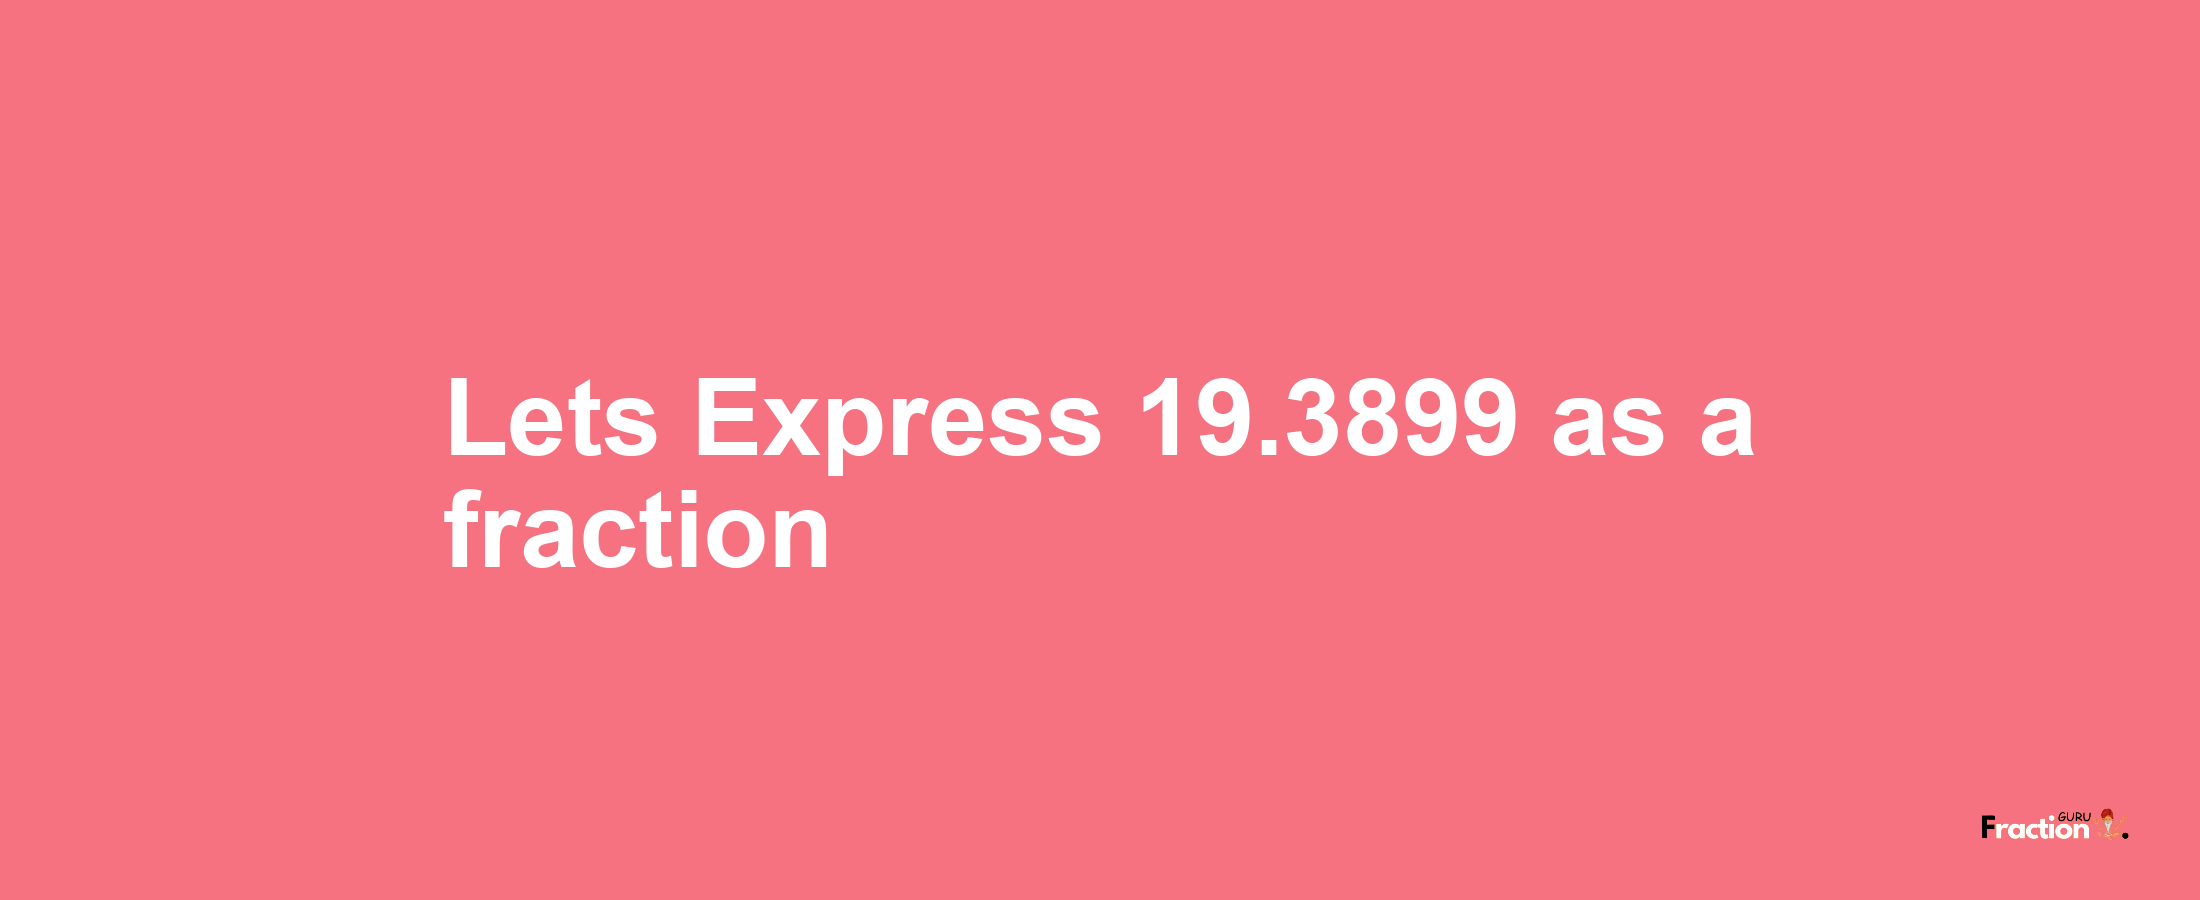 Lets Express 19.3899 as afraction